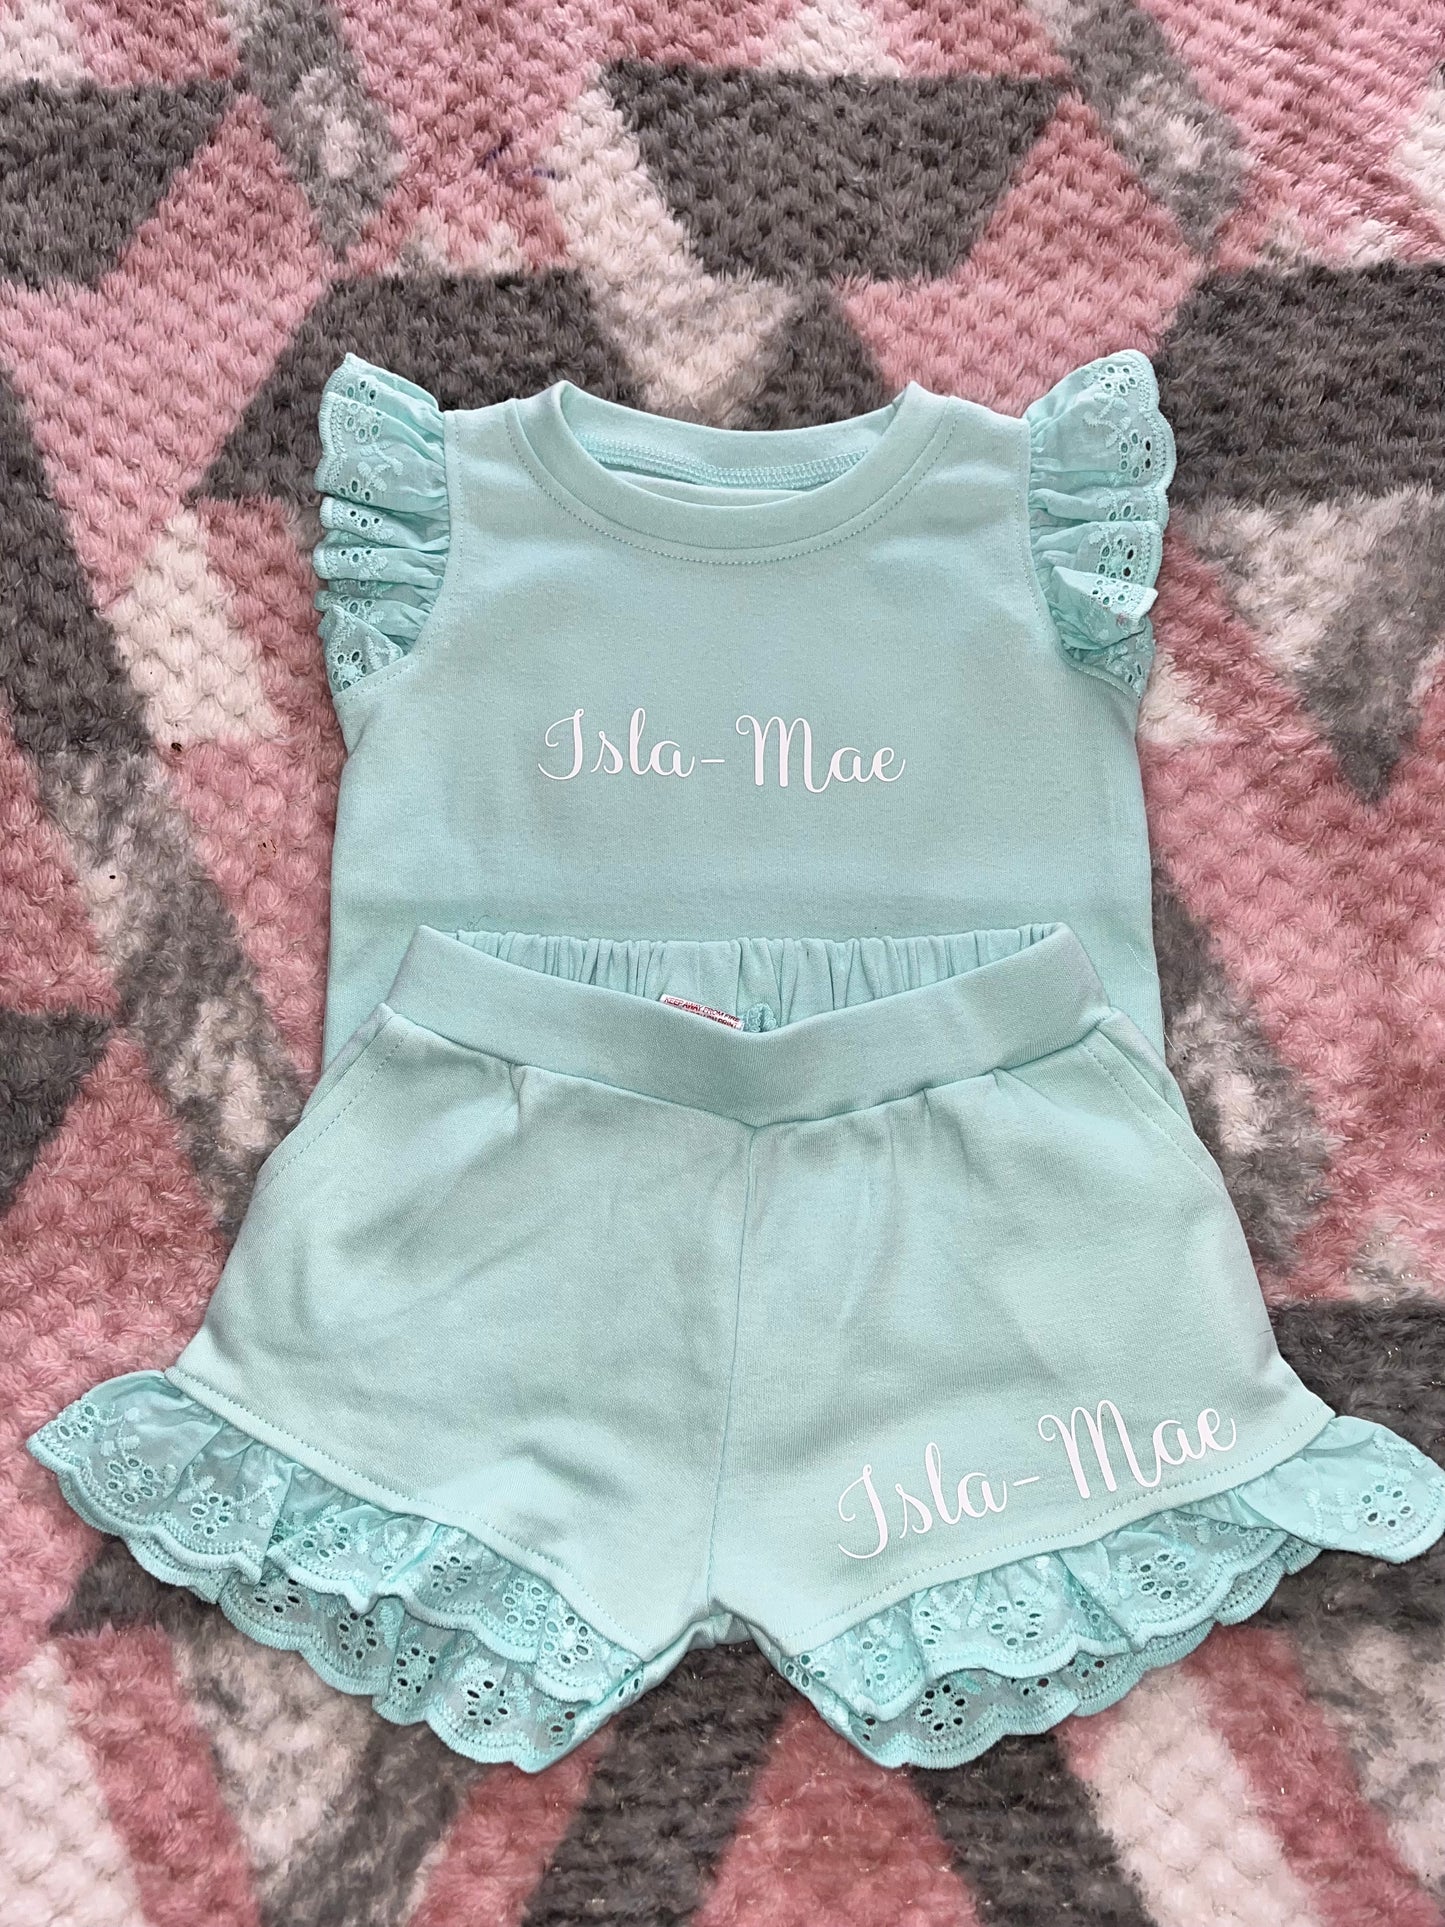 Personalised girls shorts sets - LIMITED STOCK